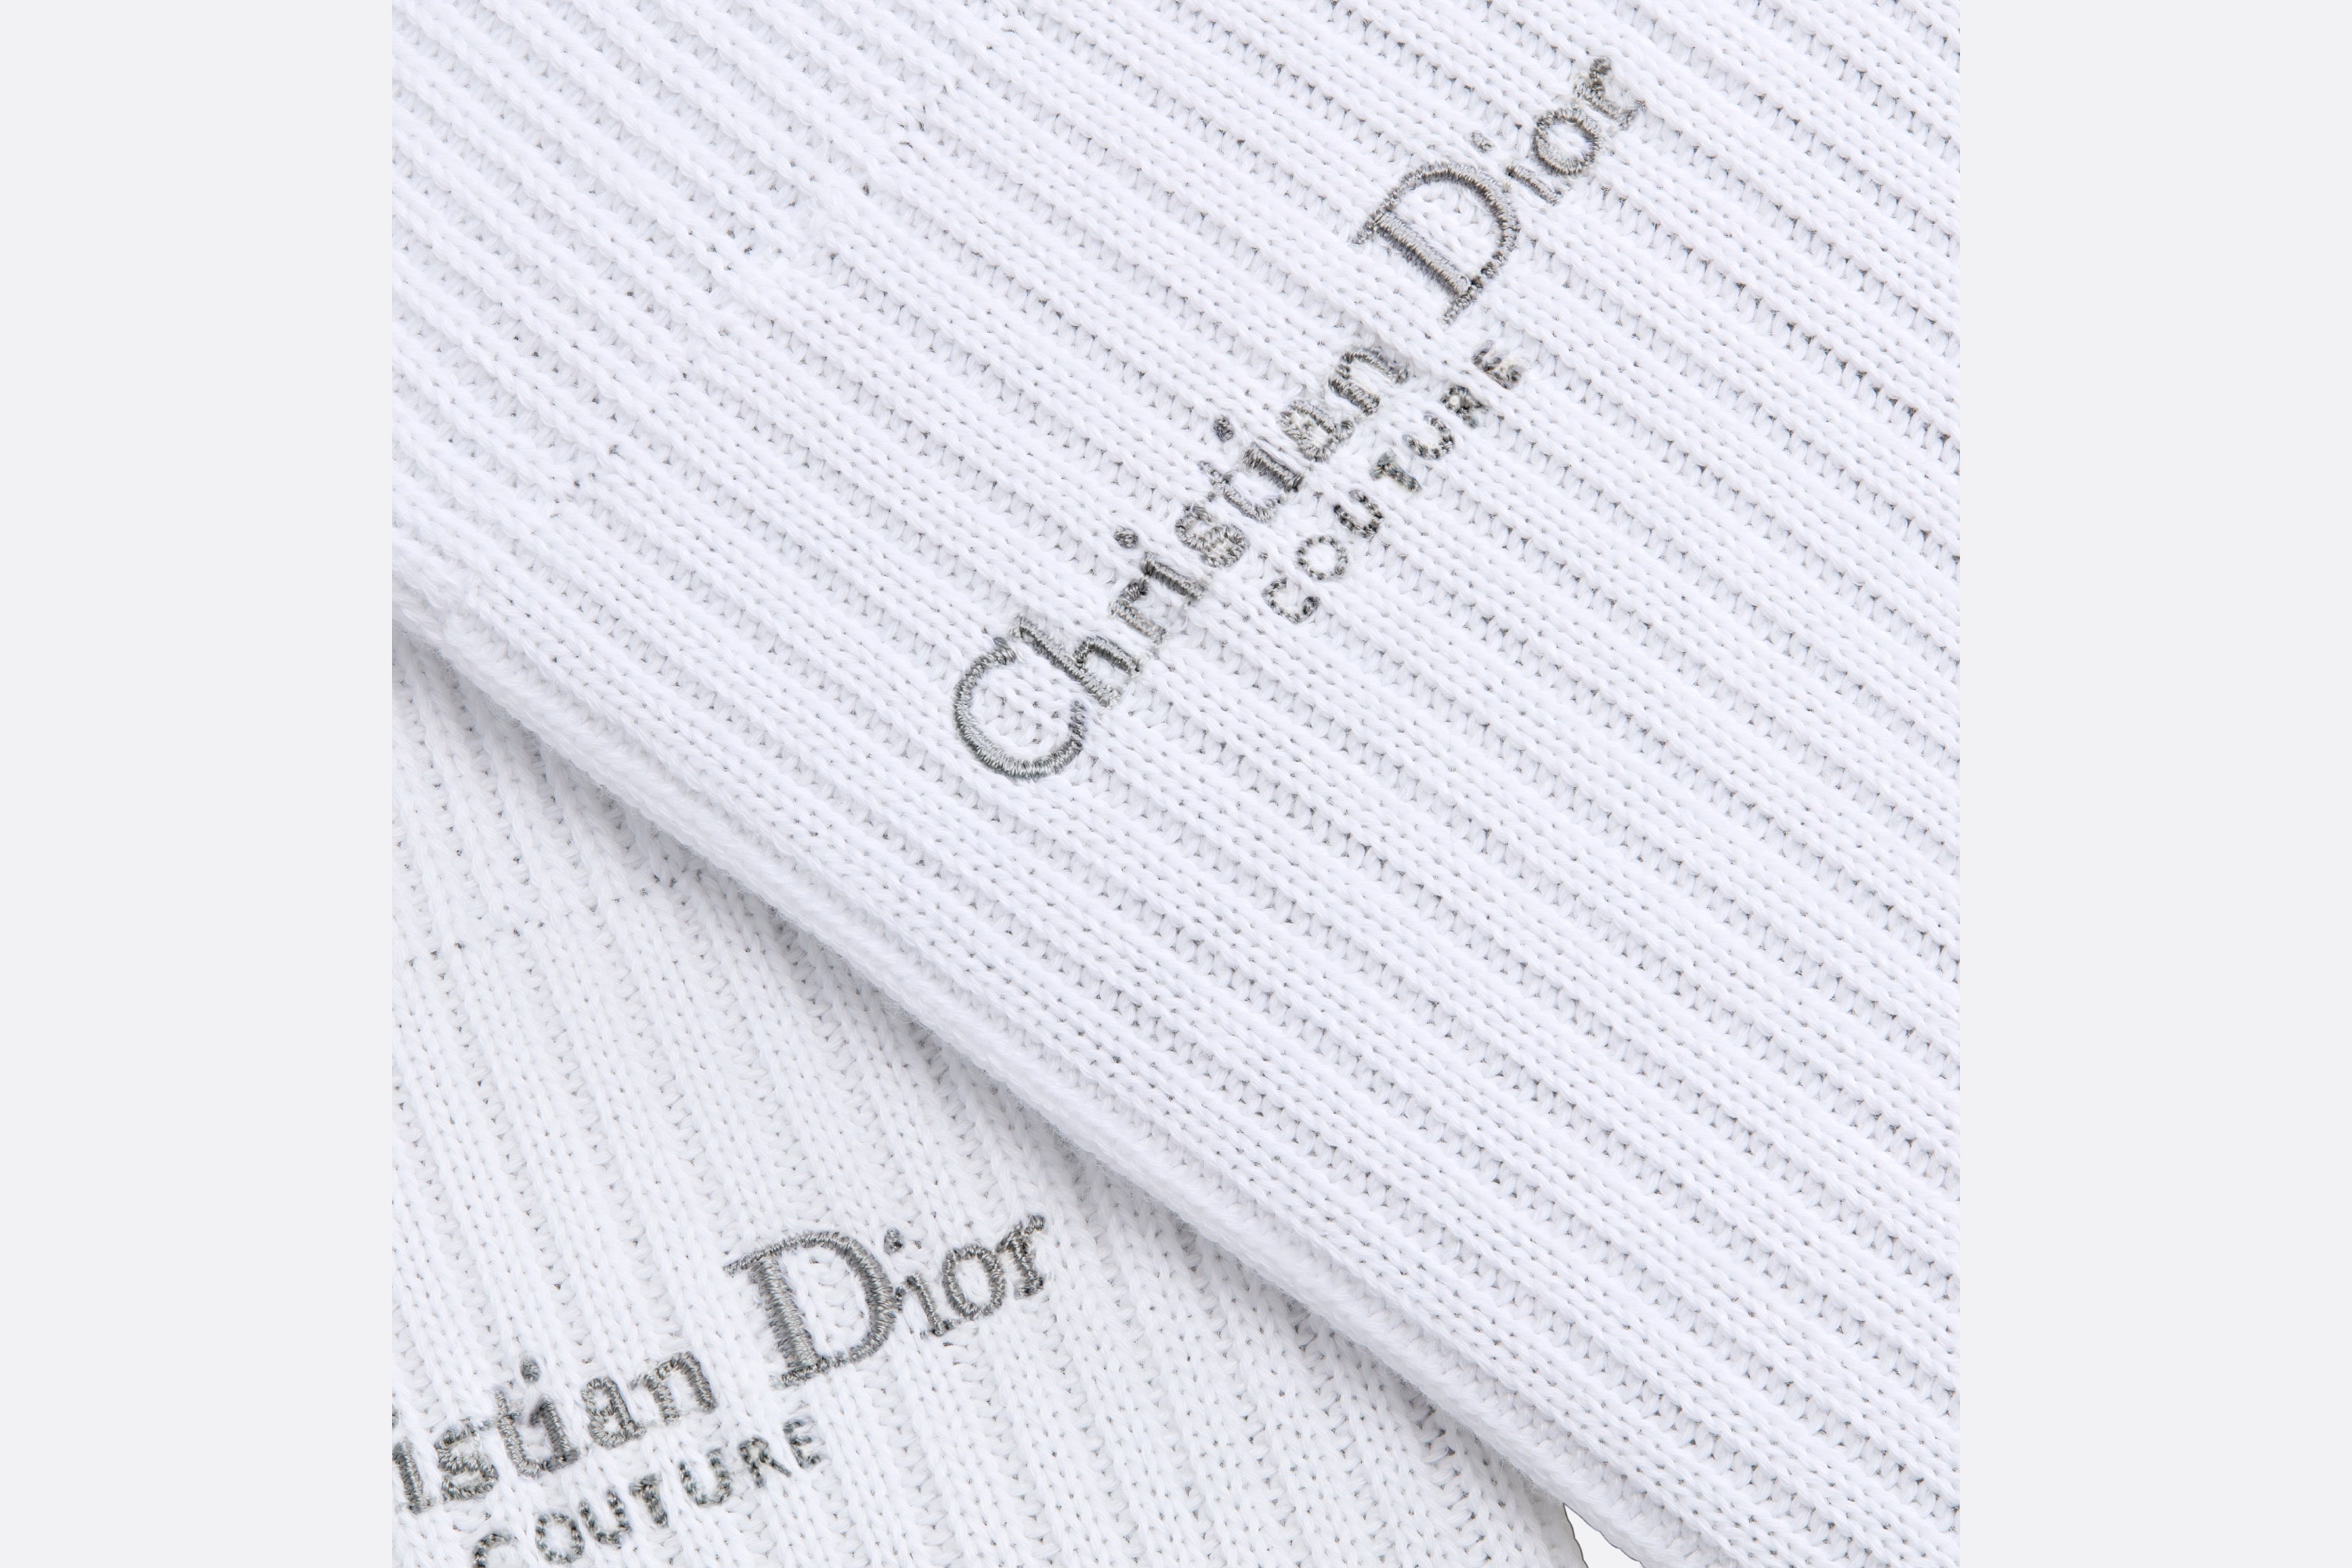 Christian Dior Couture Socks - 3